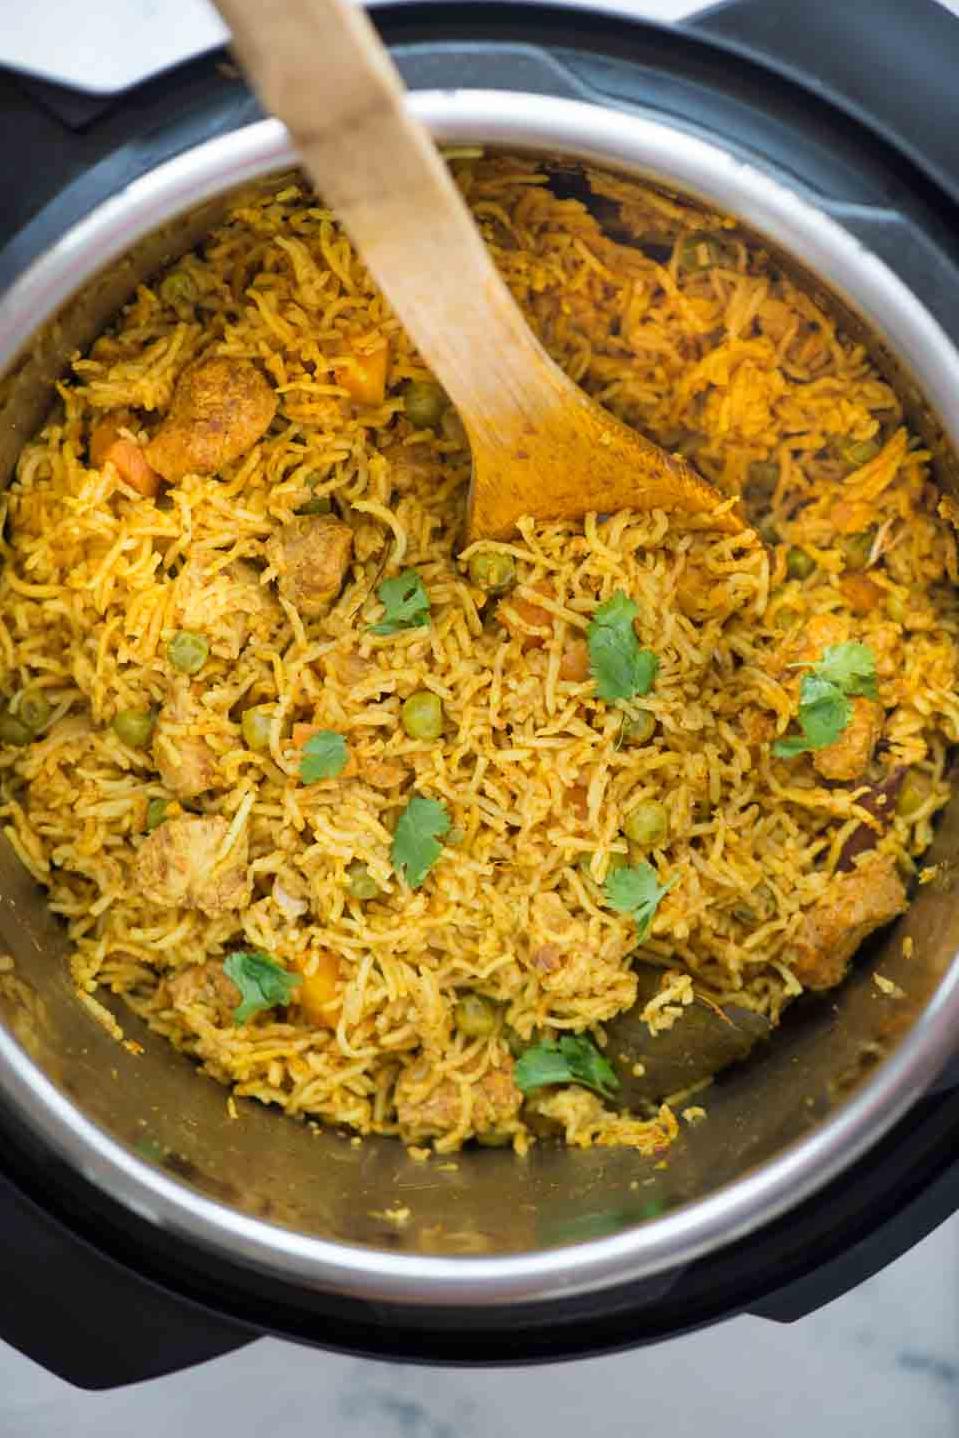  A fragrant blend of spices and savory rice